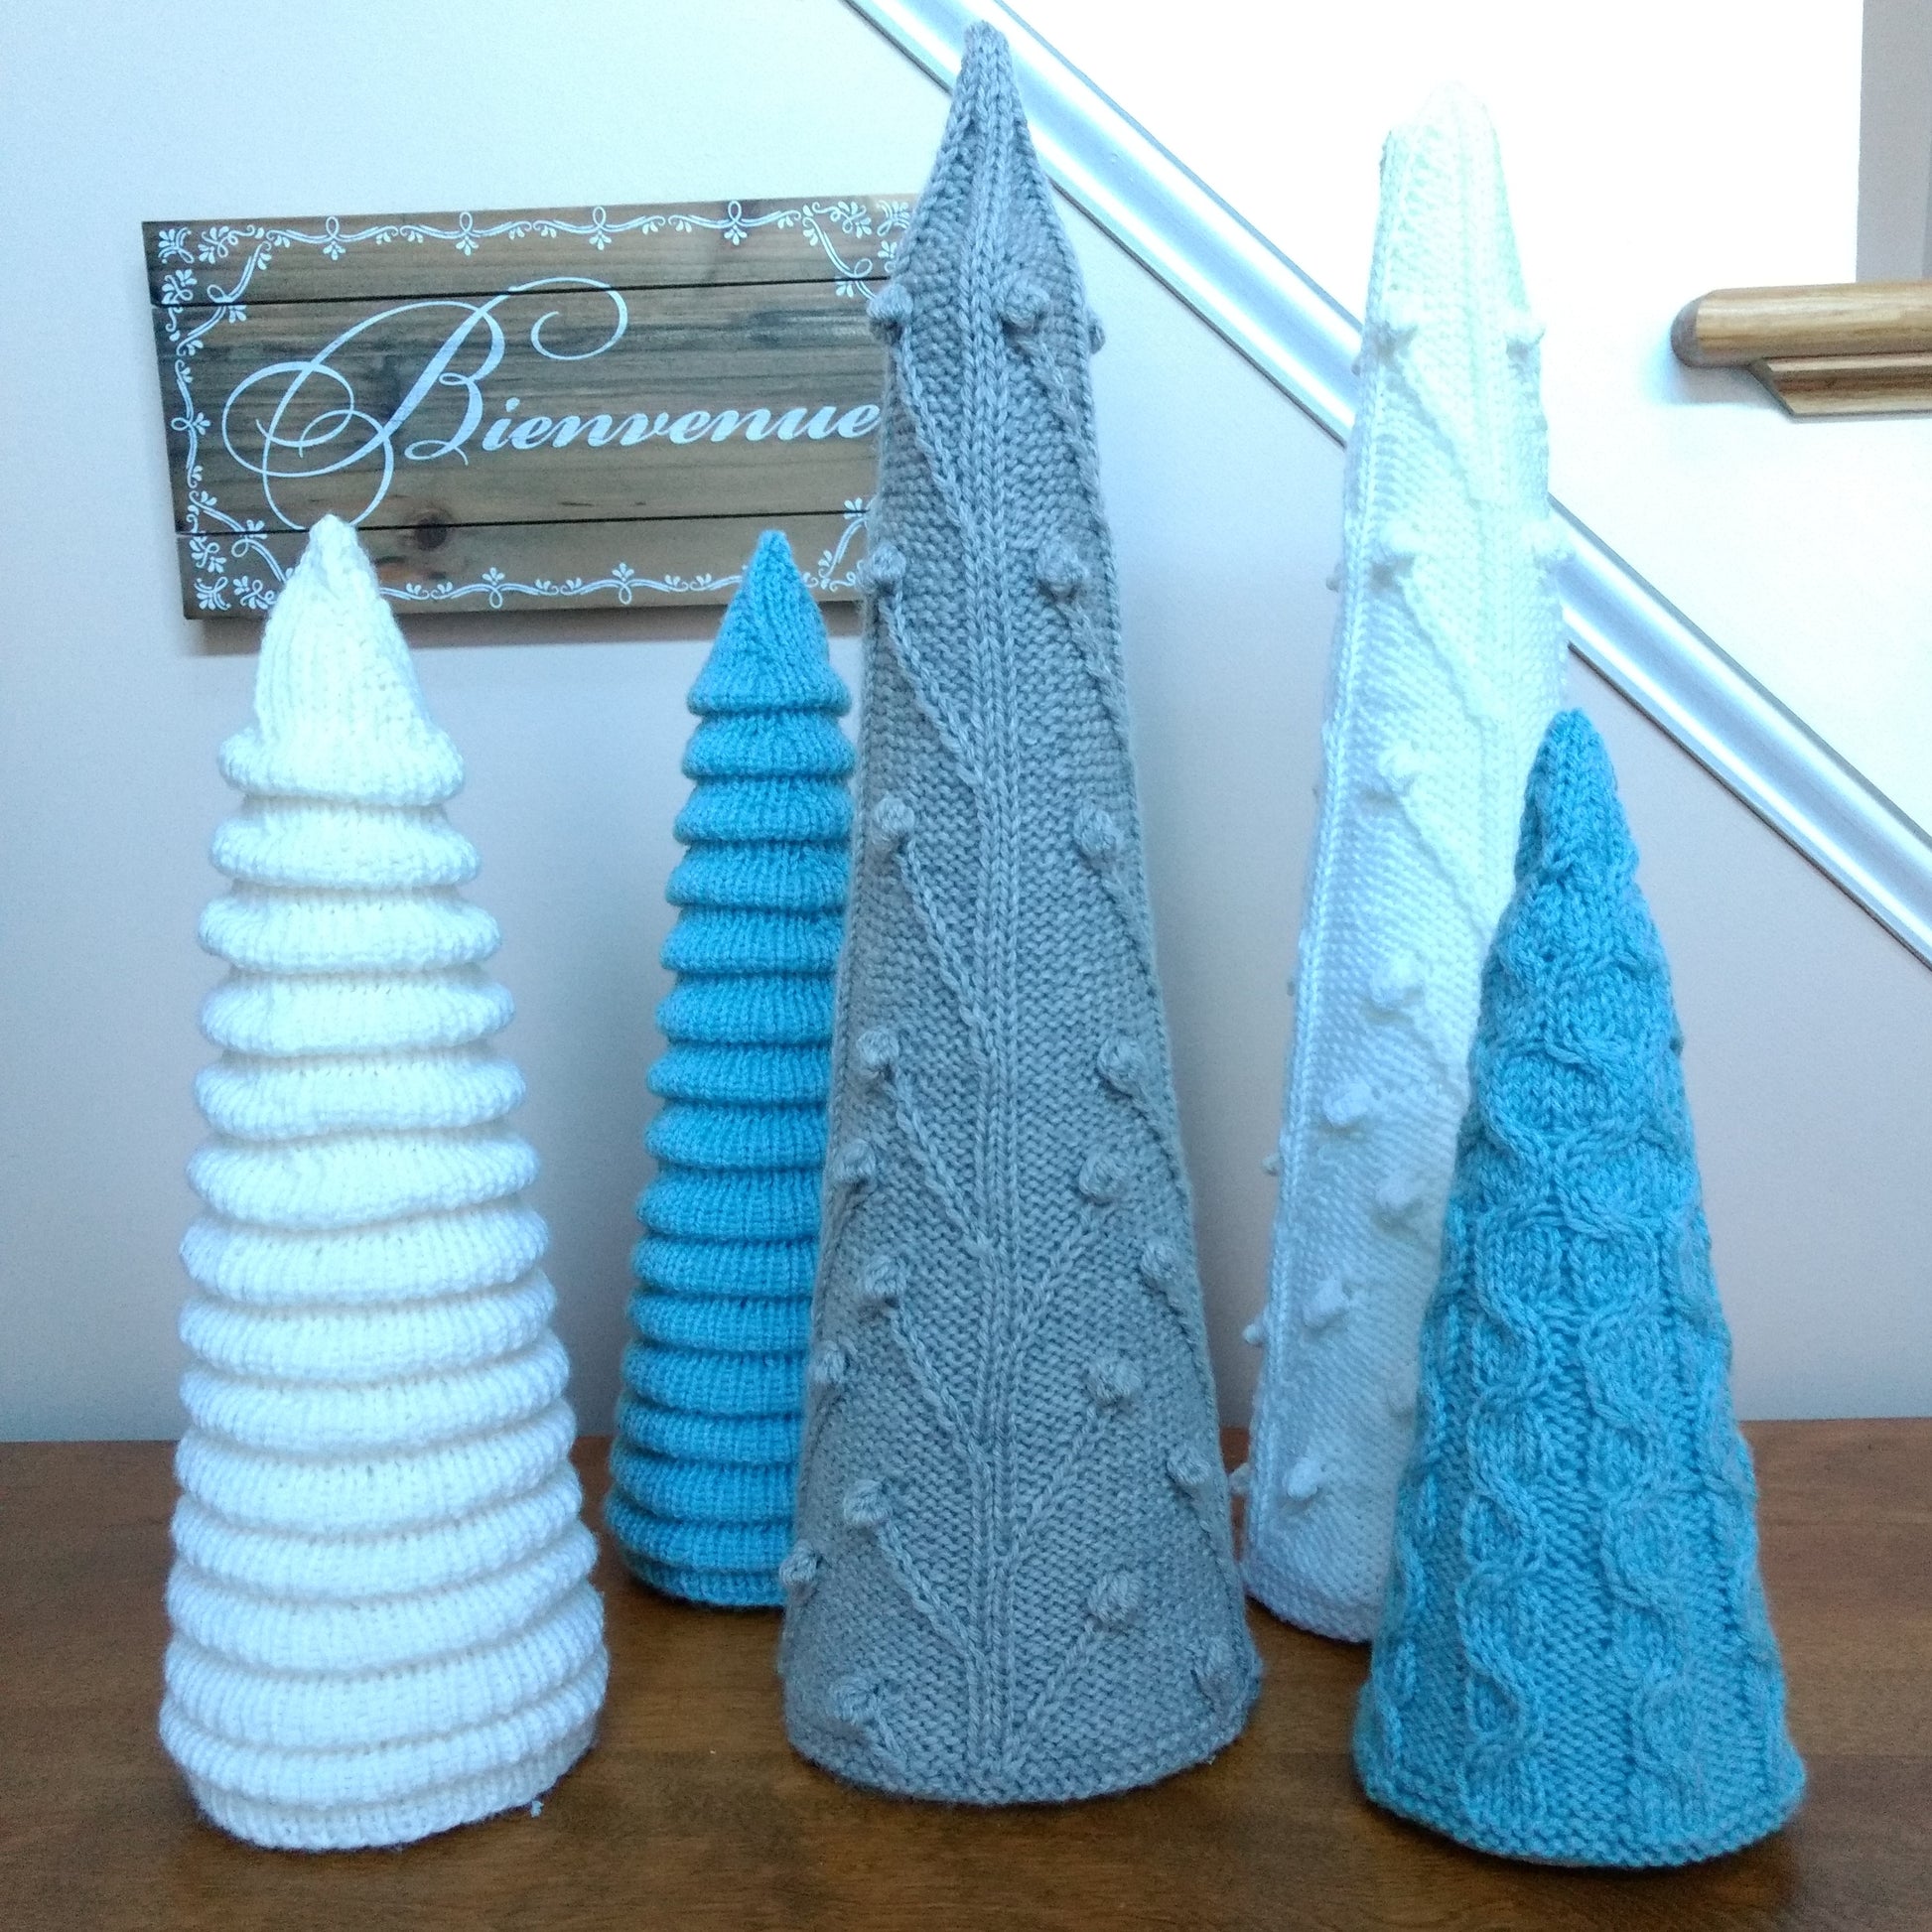 Knitted Christmas Trees, knitting pattern, holiday decor